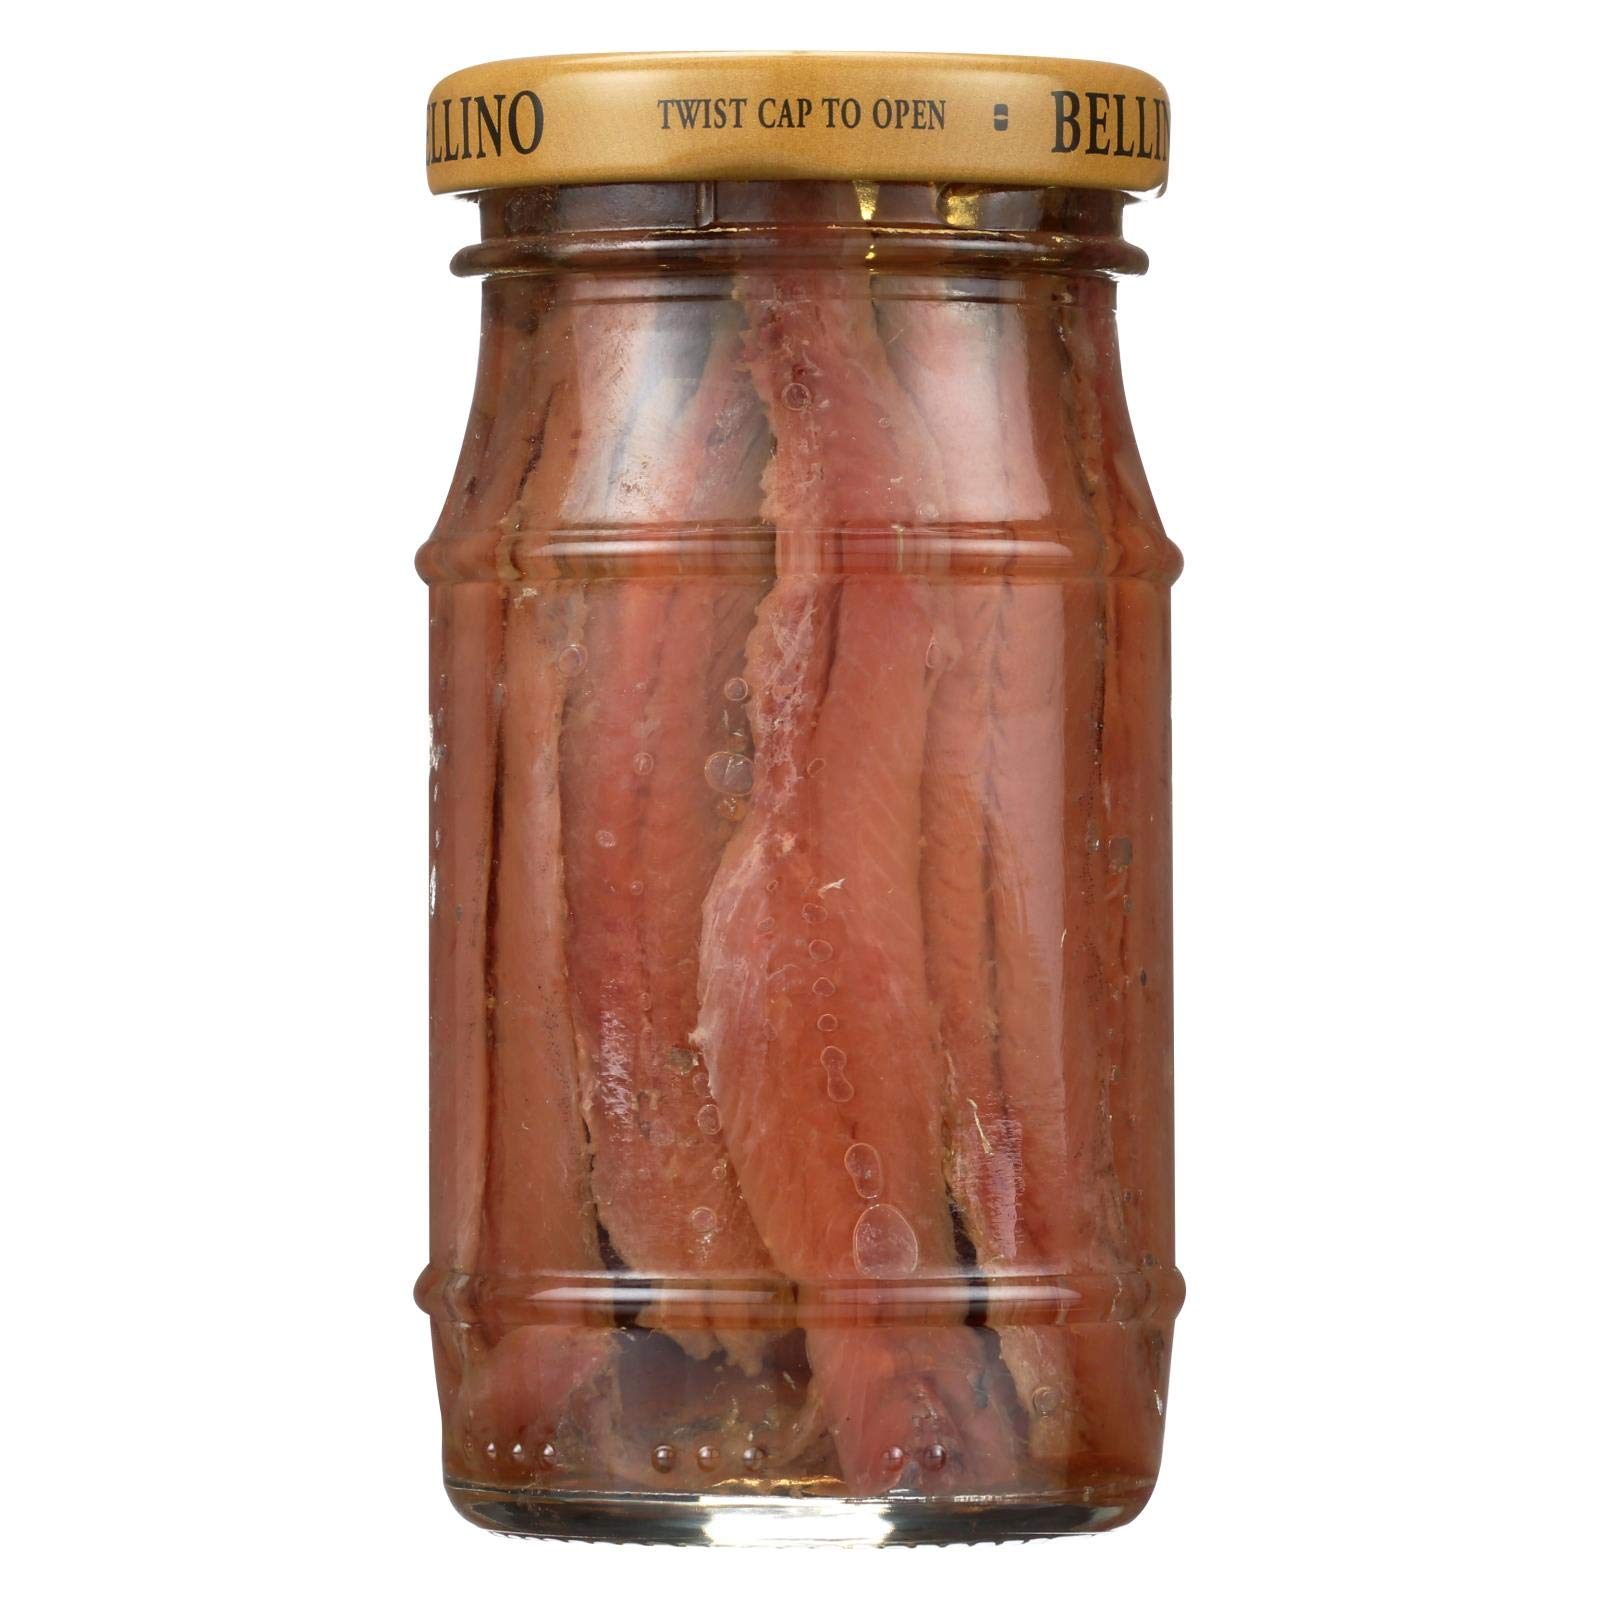 Bellino Flat Anchovies And In Oil (12x4.25 Oz)